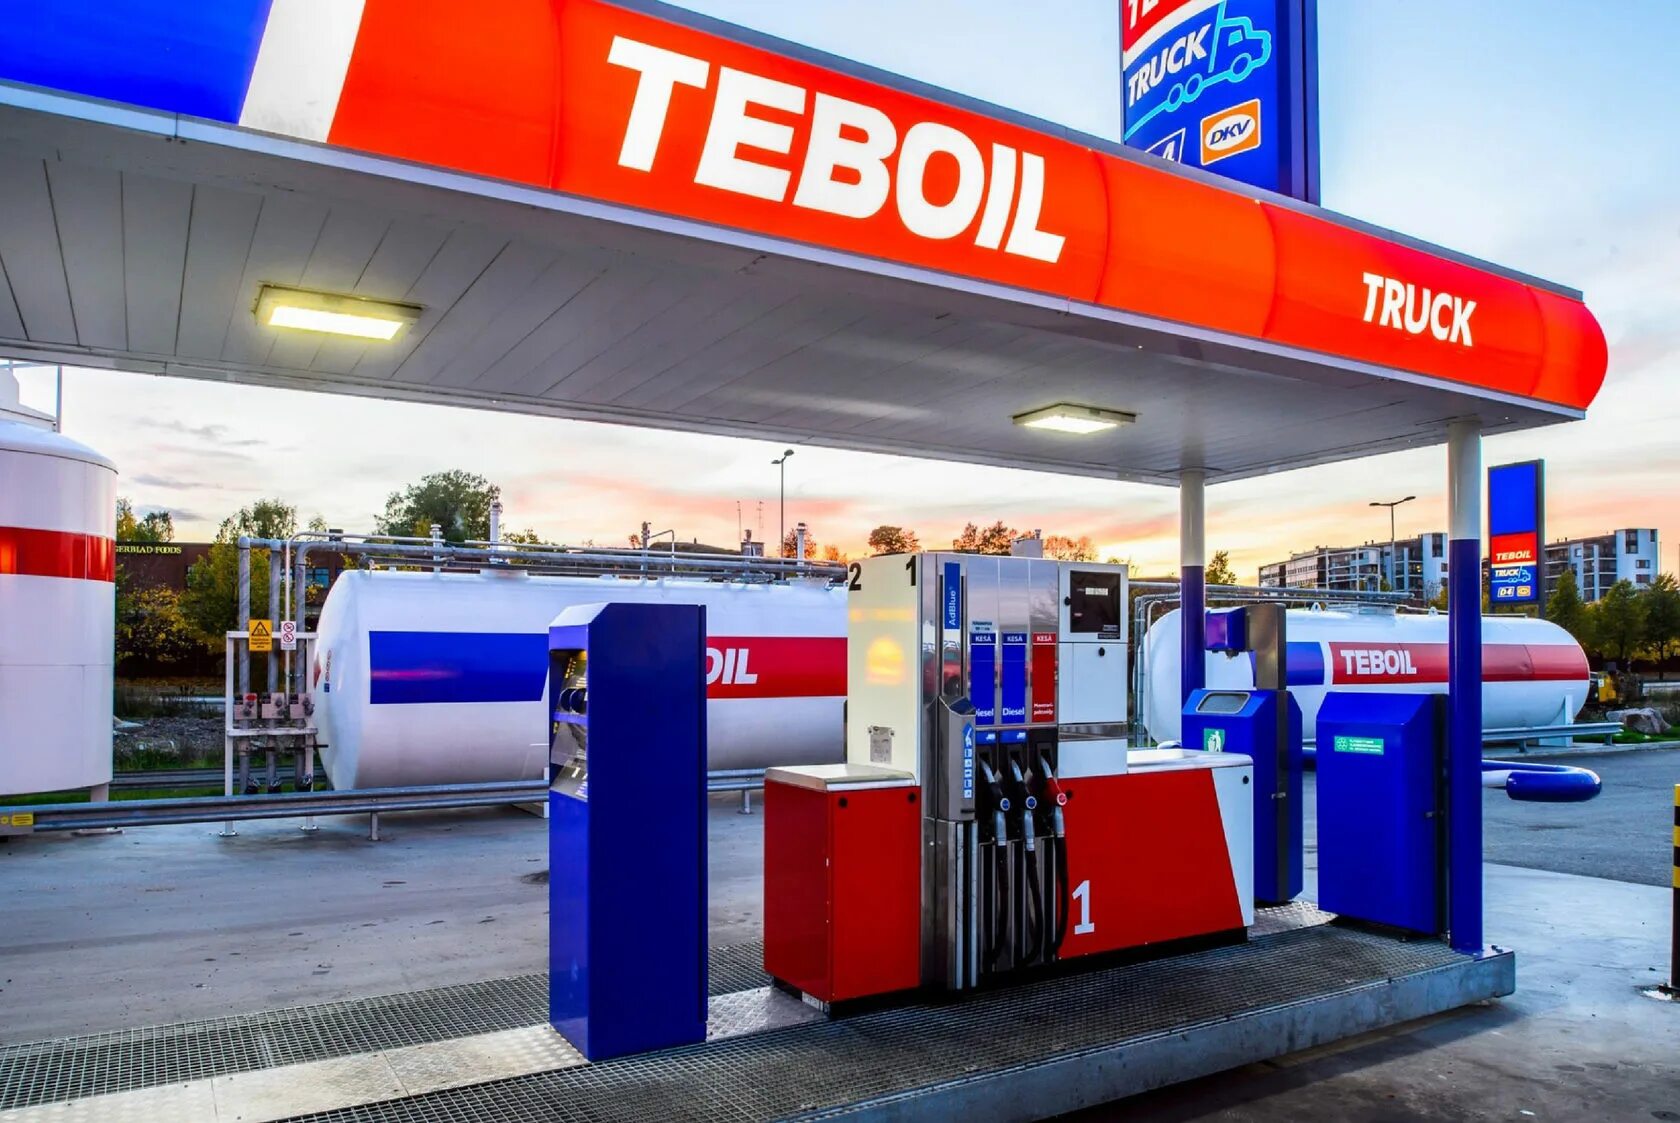 Масло т бойл. Тебойл АЗС Финляндия. Shell Teboil АЗС. АЗС Teboil в Финляндии. Тебойл Шелл Лукойл.